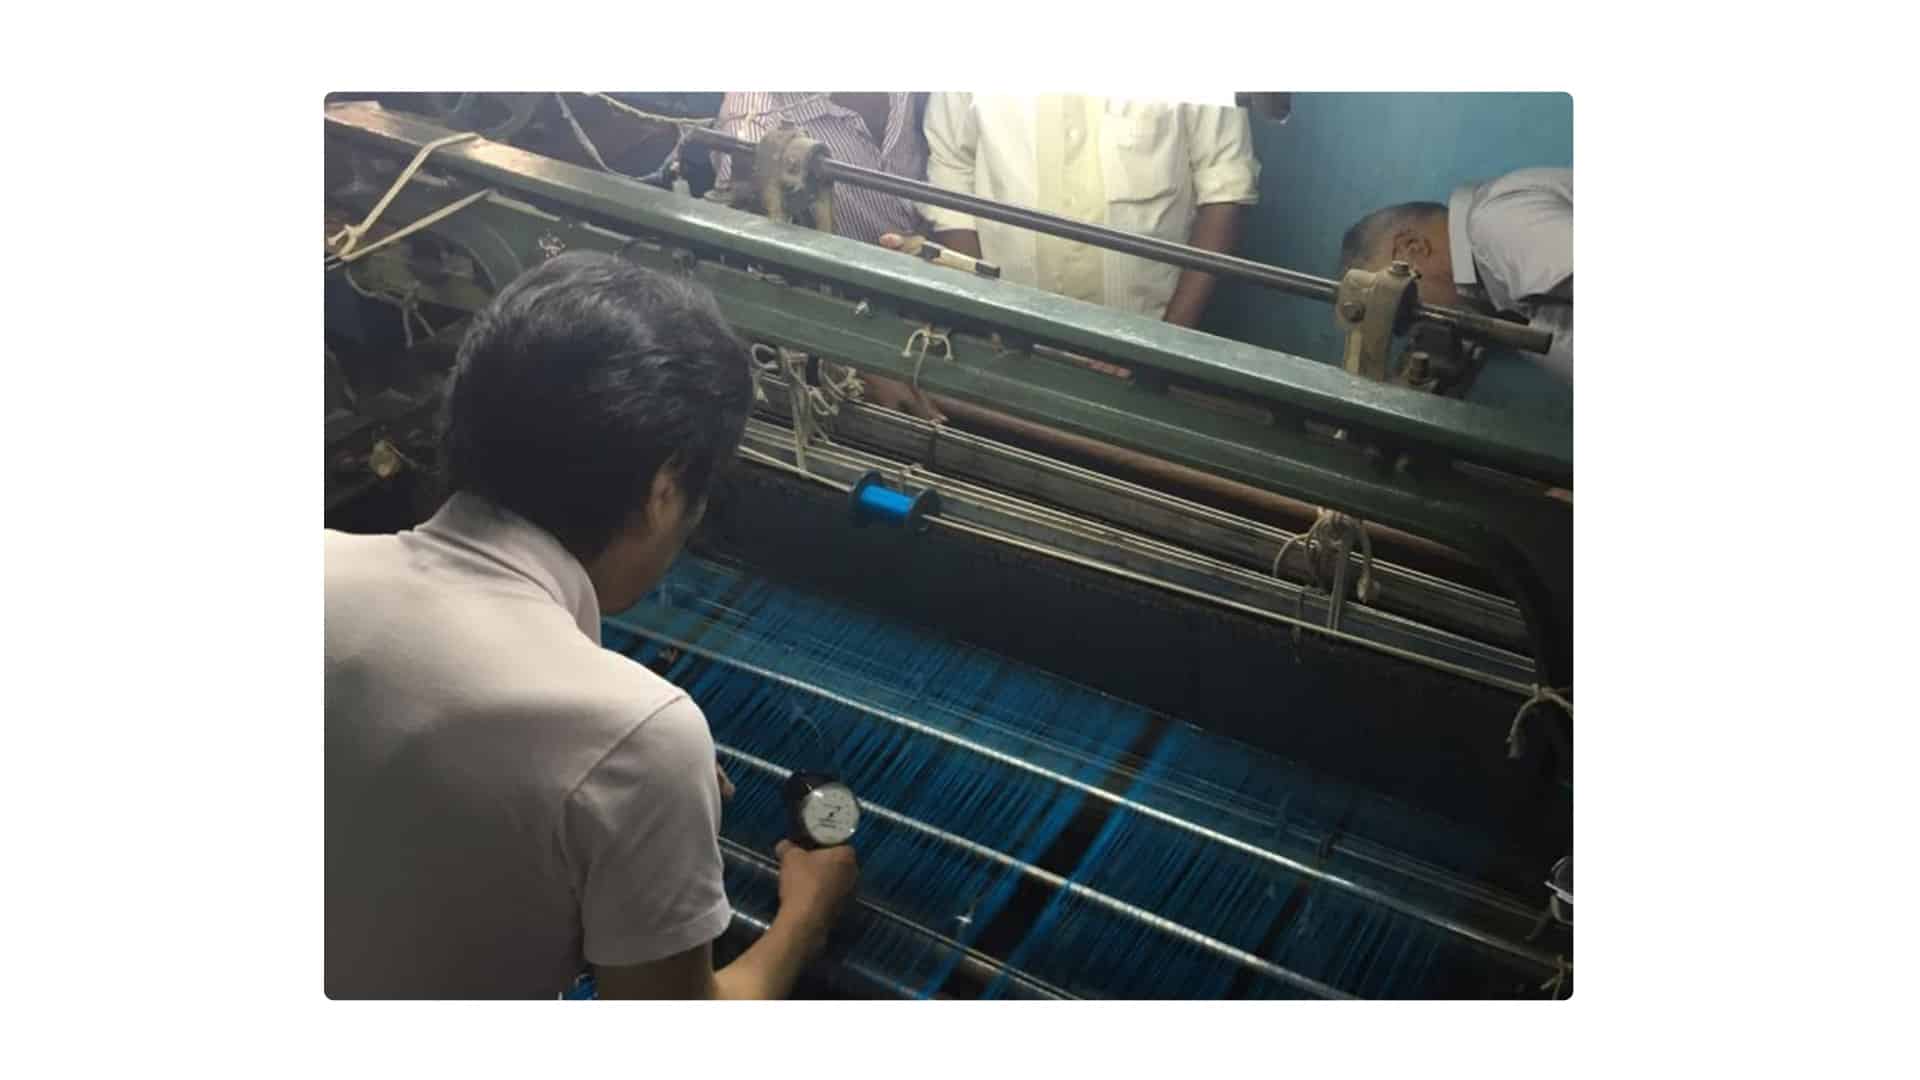 Microza system, treat wastewater from fabric dyeing, Bemberg Business, water filtration system